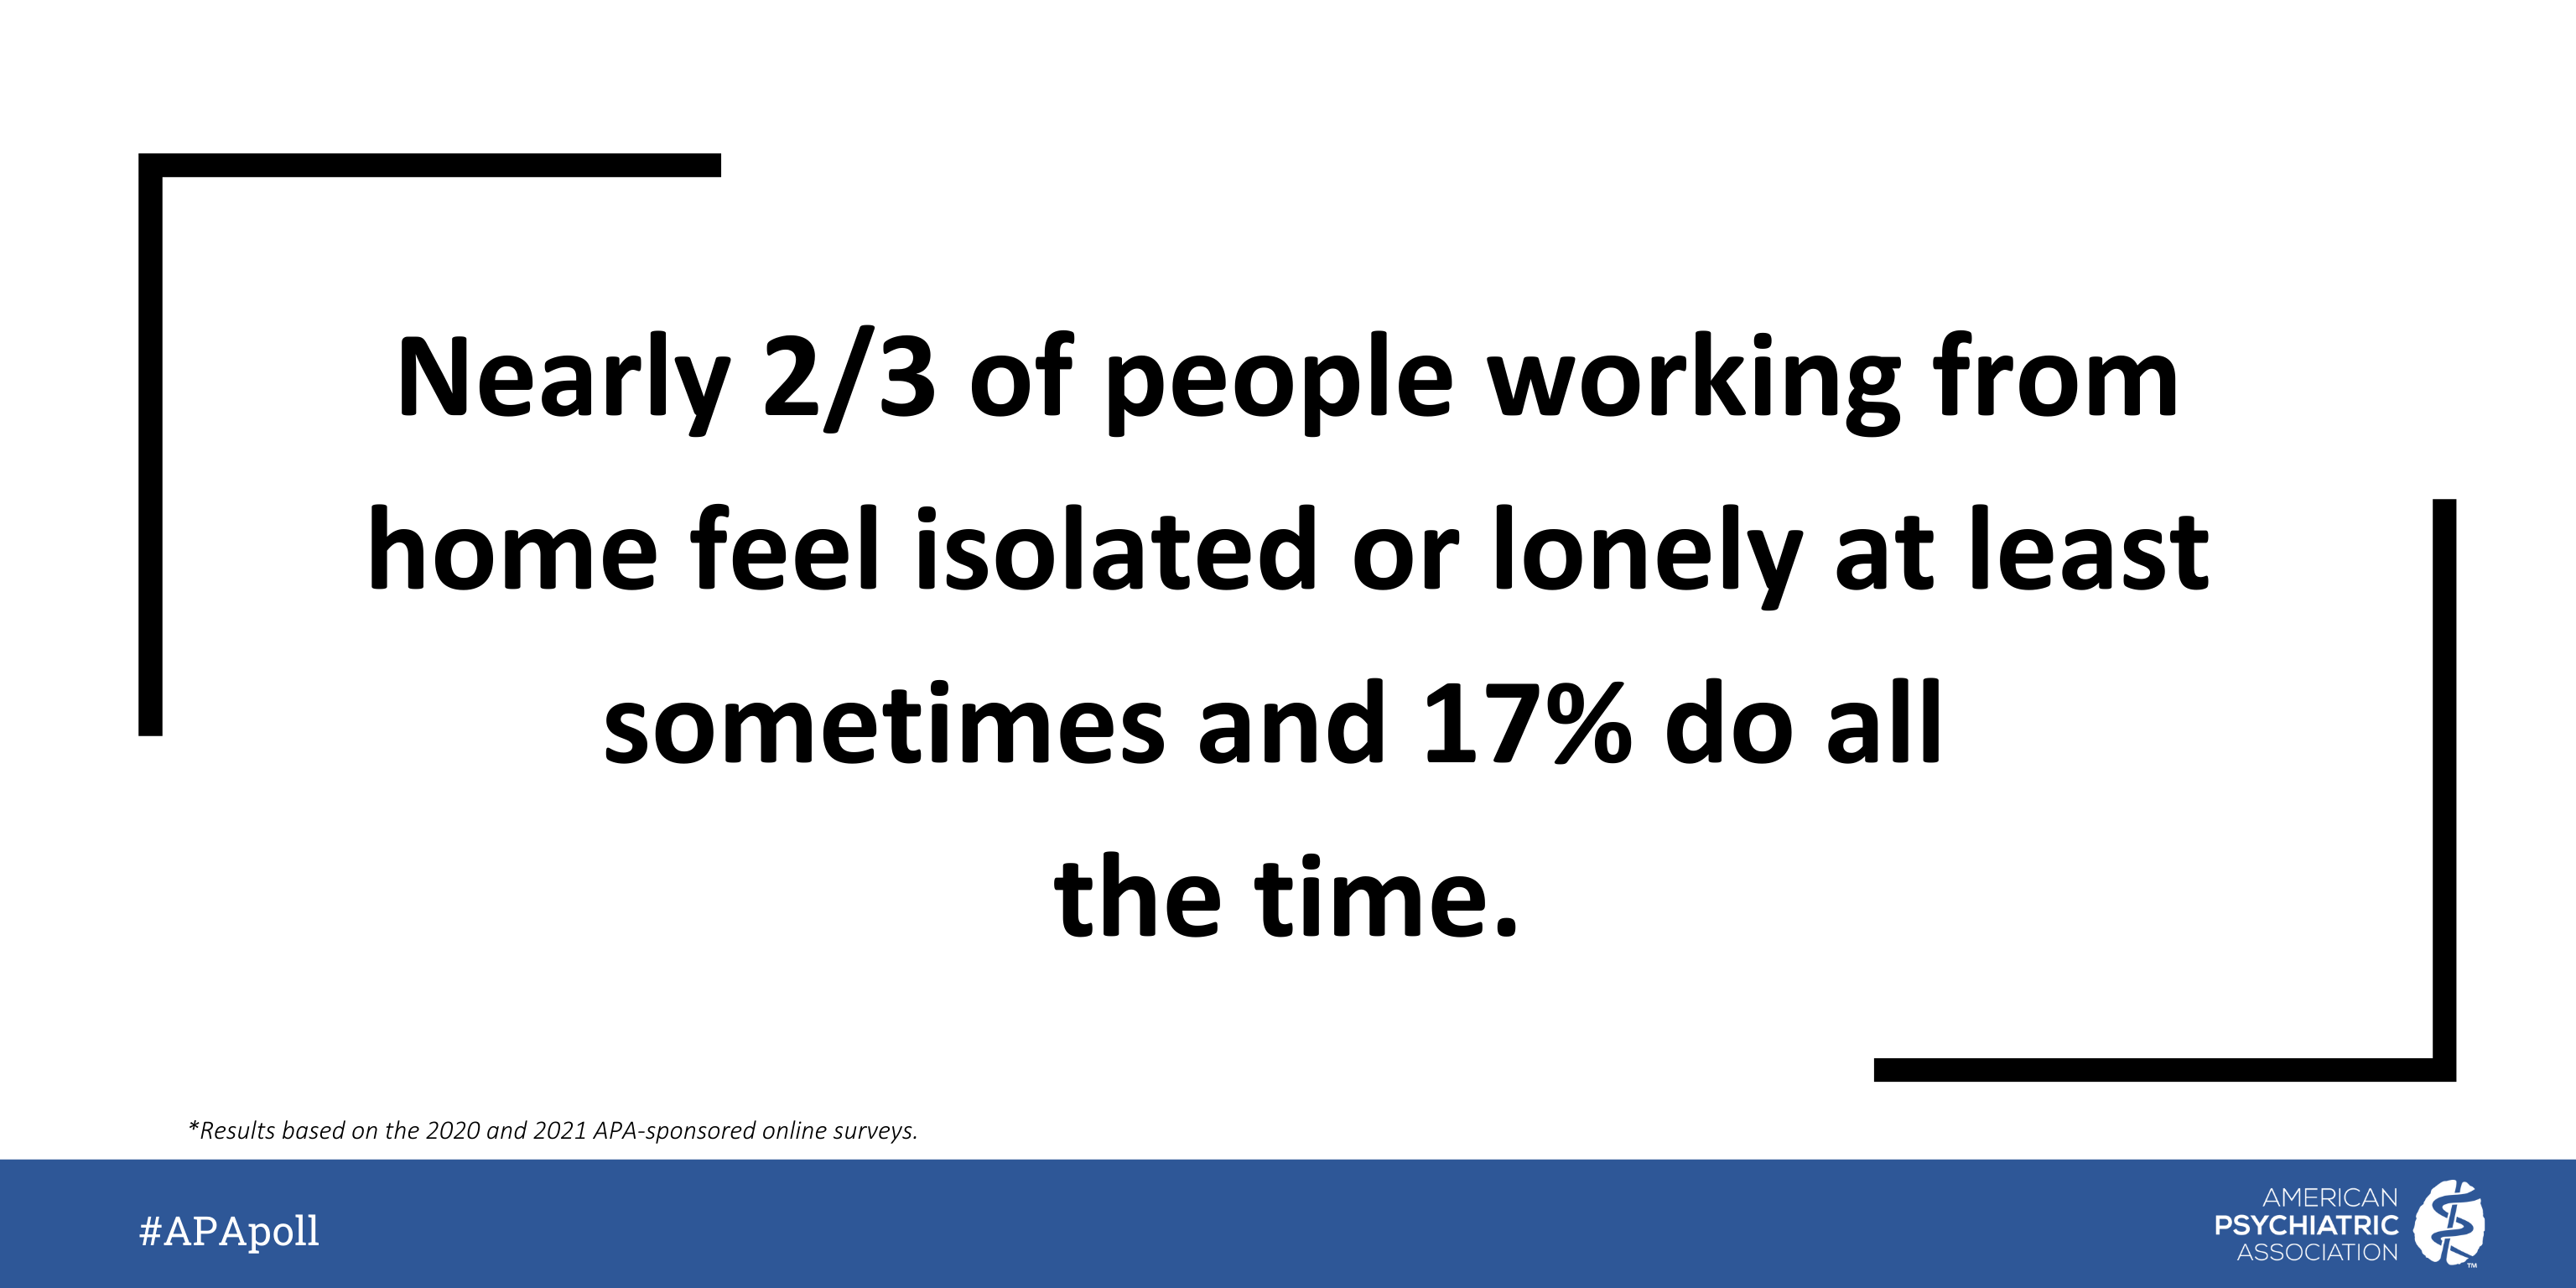 People-Working-From-Home-Feel-Isolated-002.png